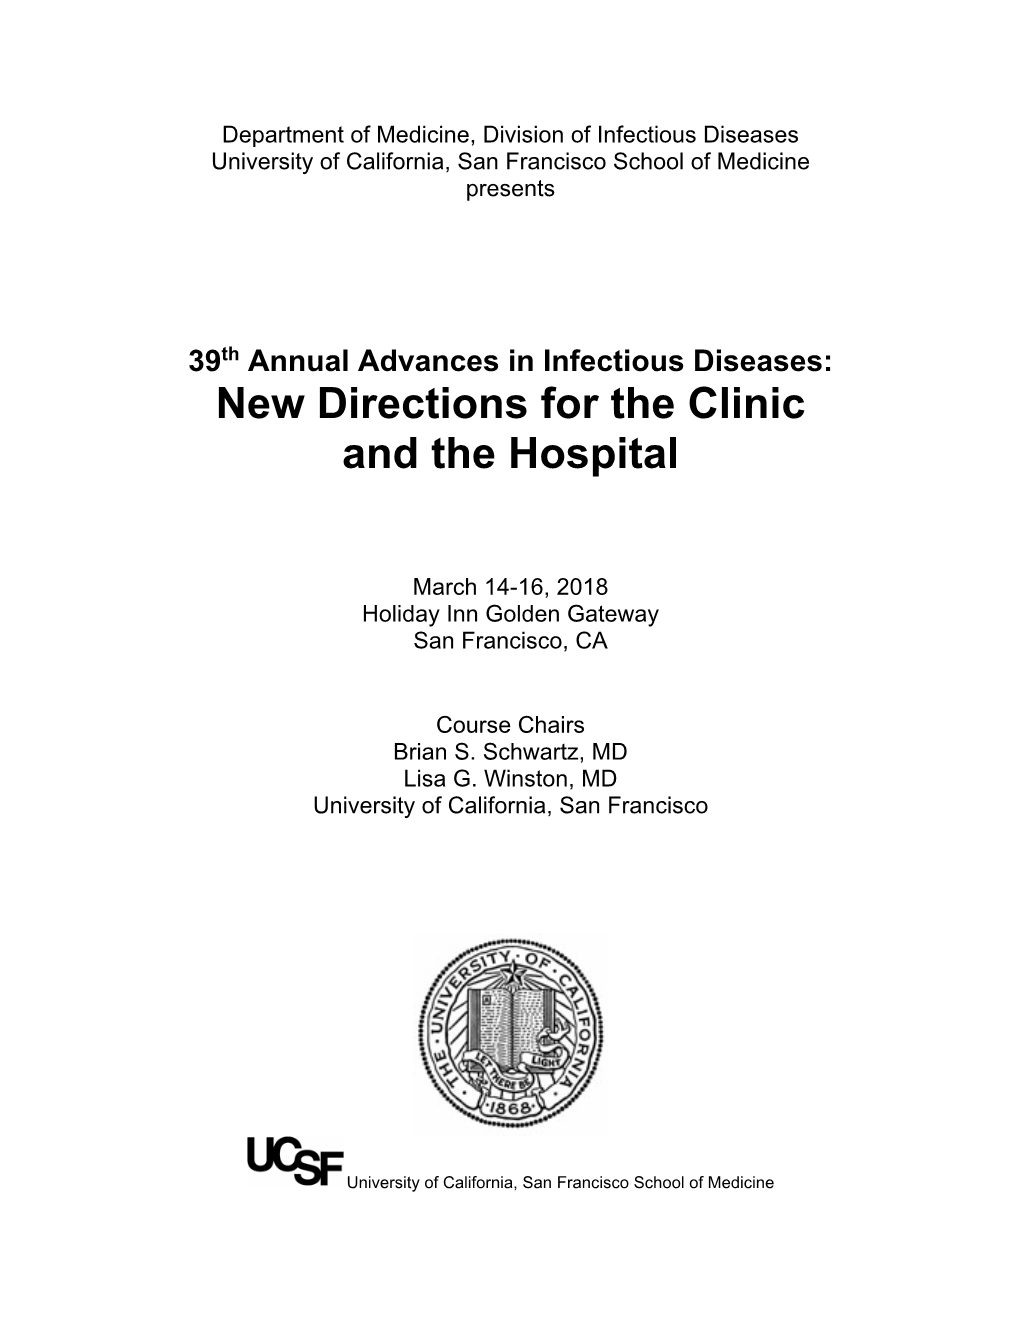 39Th Annual Advances in Infectious Diseases: New Directions for the Clinic and the Hospital